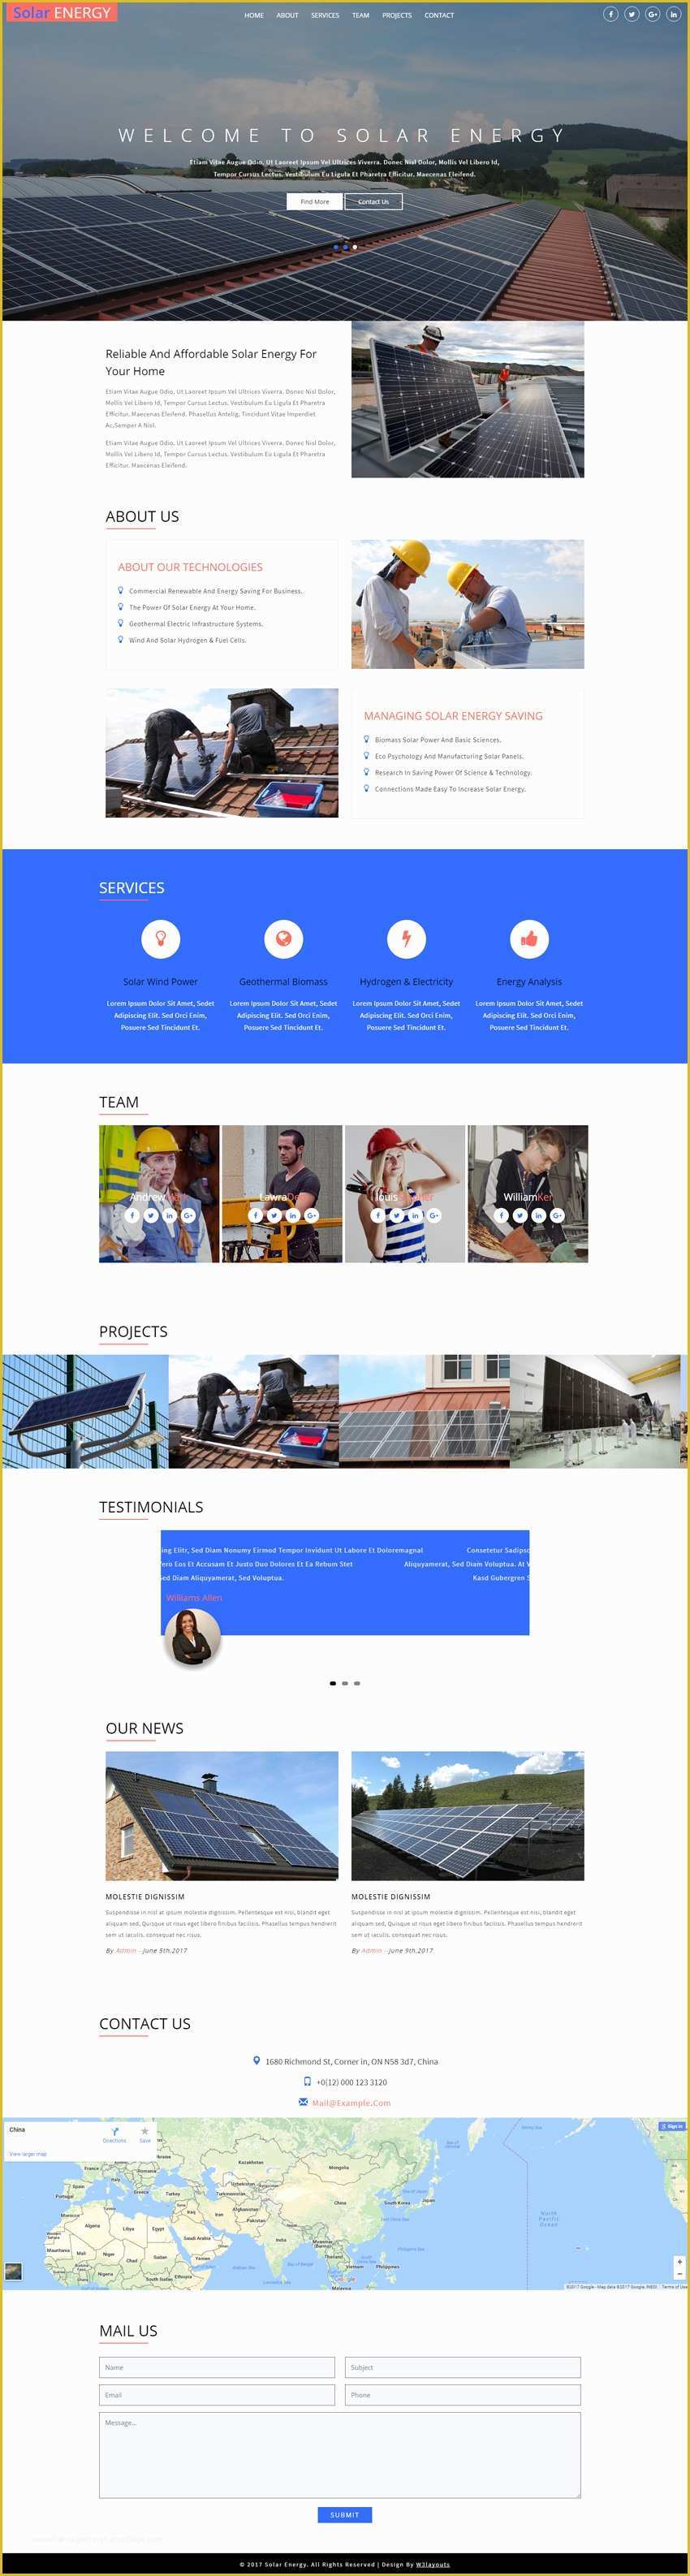 Solar Panel Website Template Free Of solar Energy An Industrial Category Bootstrap Responsive